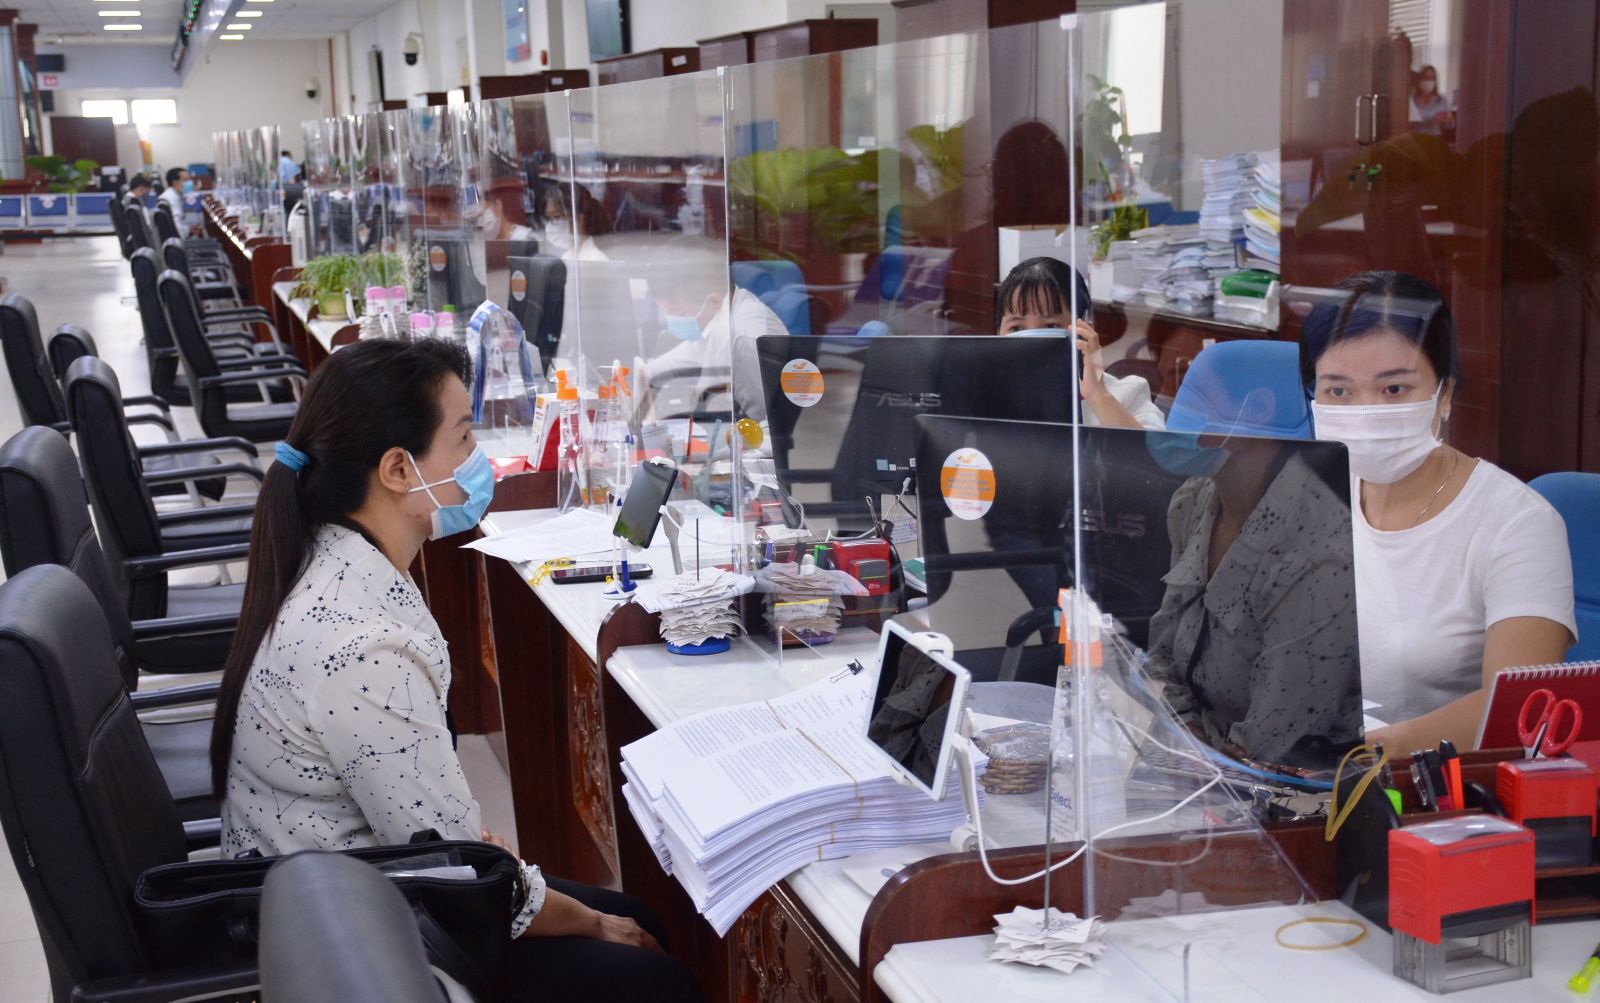 The Long An Public Administration Service Center will temporarily stop receiving dossiers submitted directly for administrative procedures at the Center from 0:00 on July 8, 2021 until further notice. (Photo: Nhat Minh)